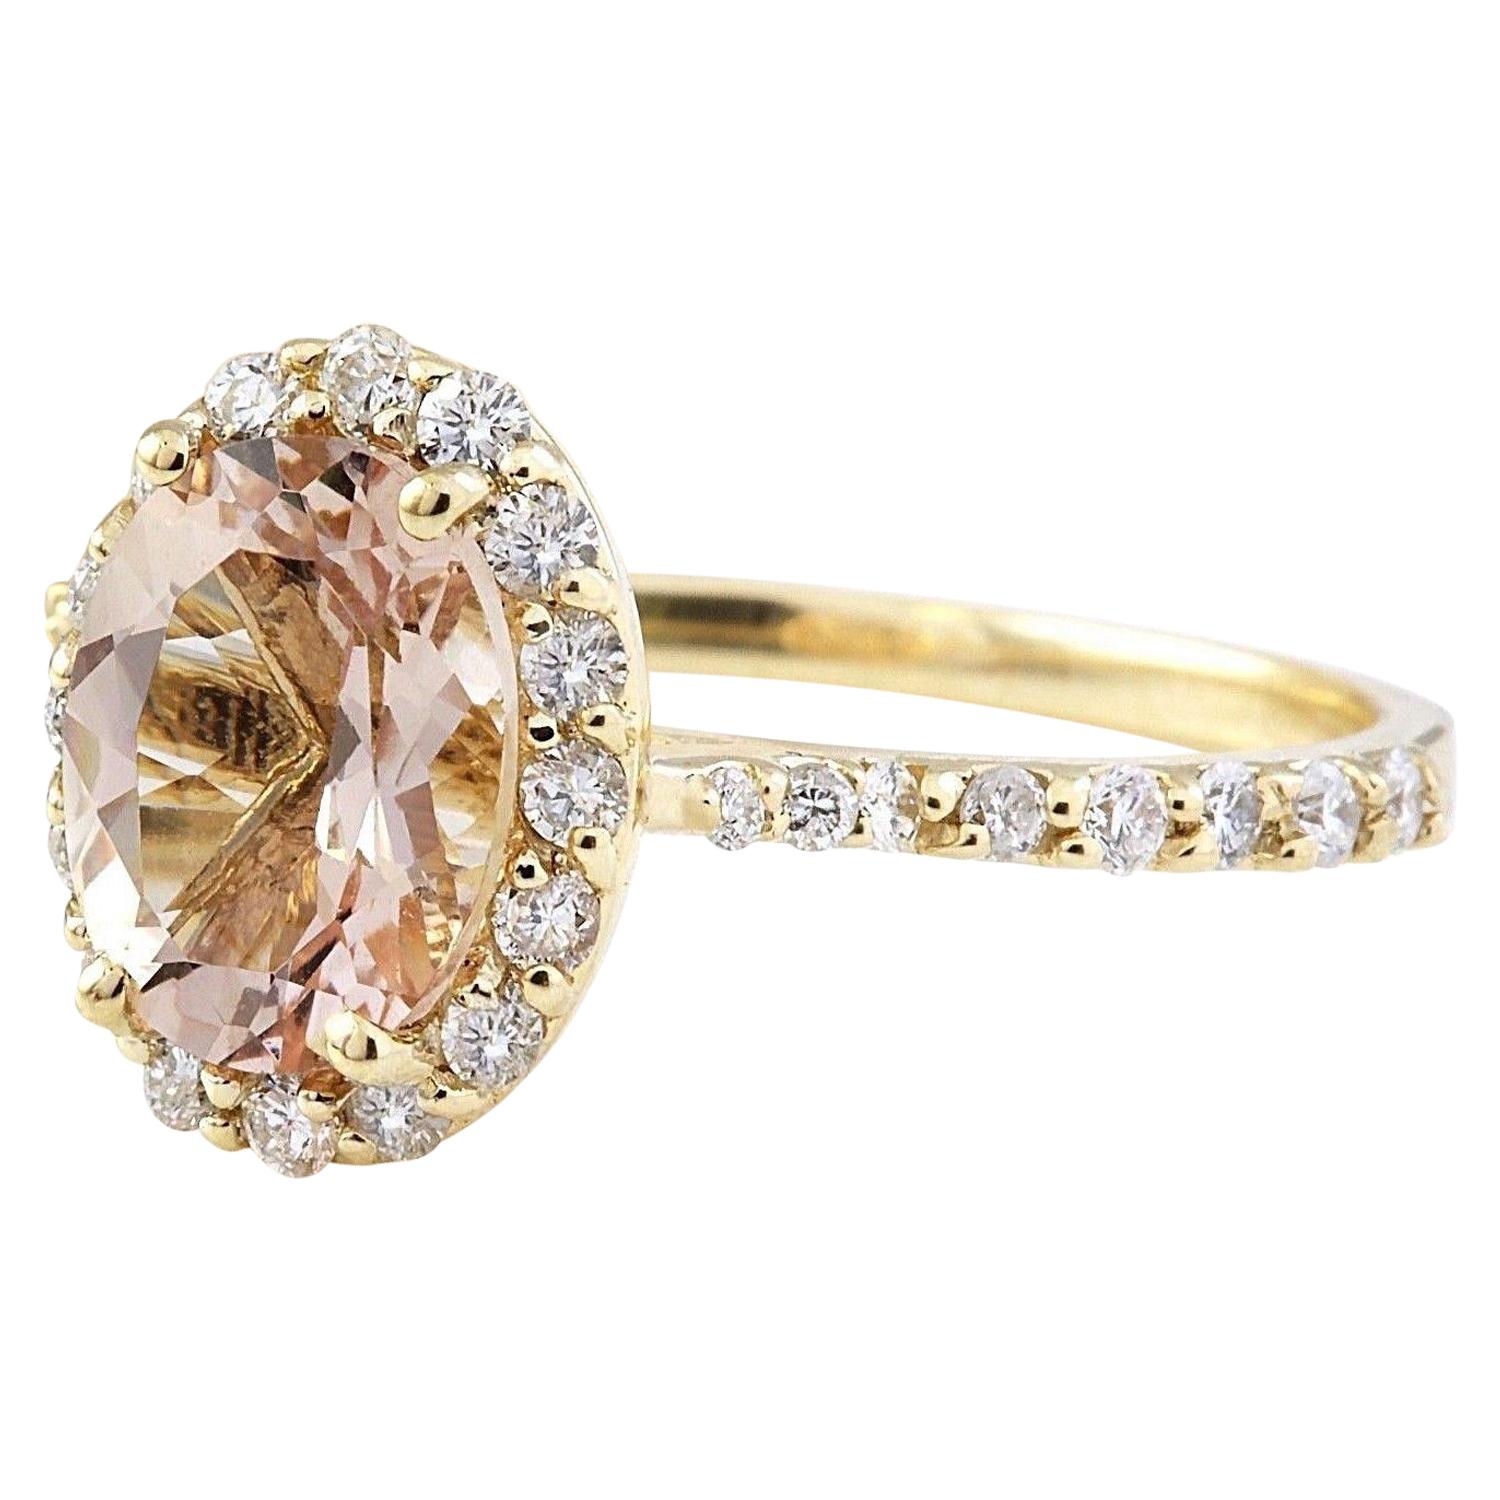 2.28 Carat Natural Morganite 14K Solid Yellow Gold Diamond Ring
 Item Type: Ring
 Item Style: Engagement
 Material: 14K Yellow Gold
 Mainstone: Morganite
 Stone Color: Peach
 Stone Weight: 1.58 Carat
 Stone Shape: Oval
 Stone Quantity: 1
 Stone